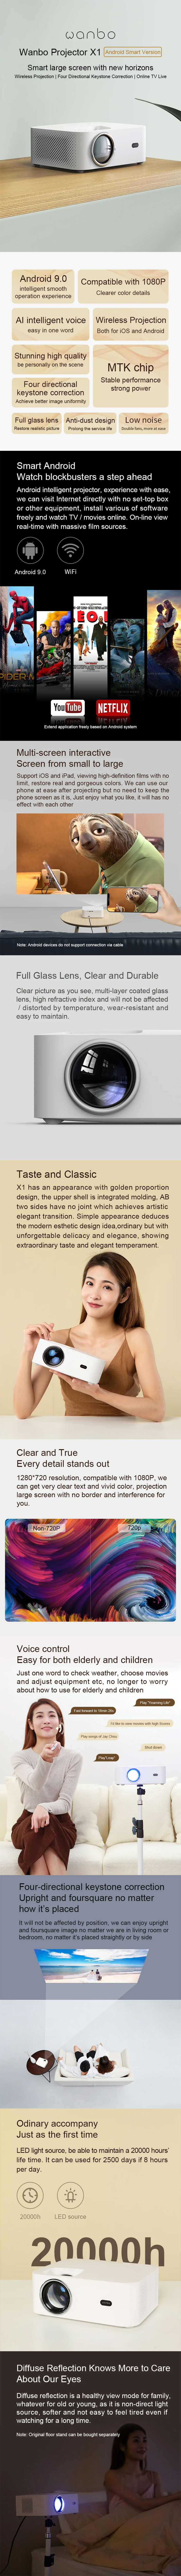 [Android 9.0] XIAOMI Wanbo X1 WIFI Projector 1080P Supported Netflix YouTube Online TV 350 ANSI Lumens 1+8G Four-way Keystone Correction Home Theater